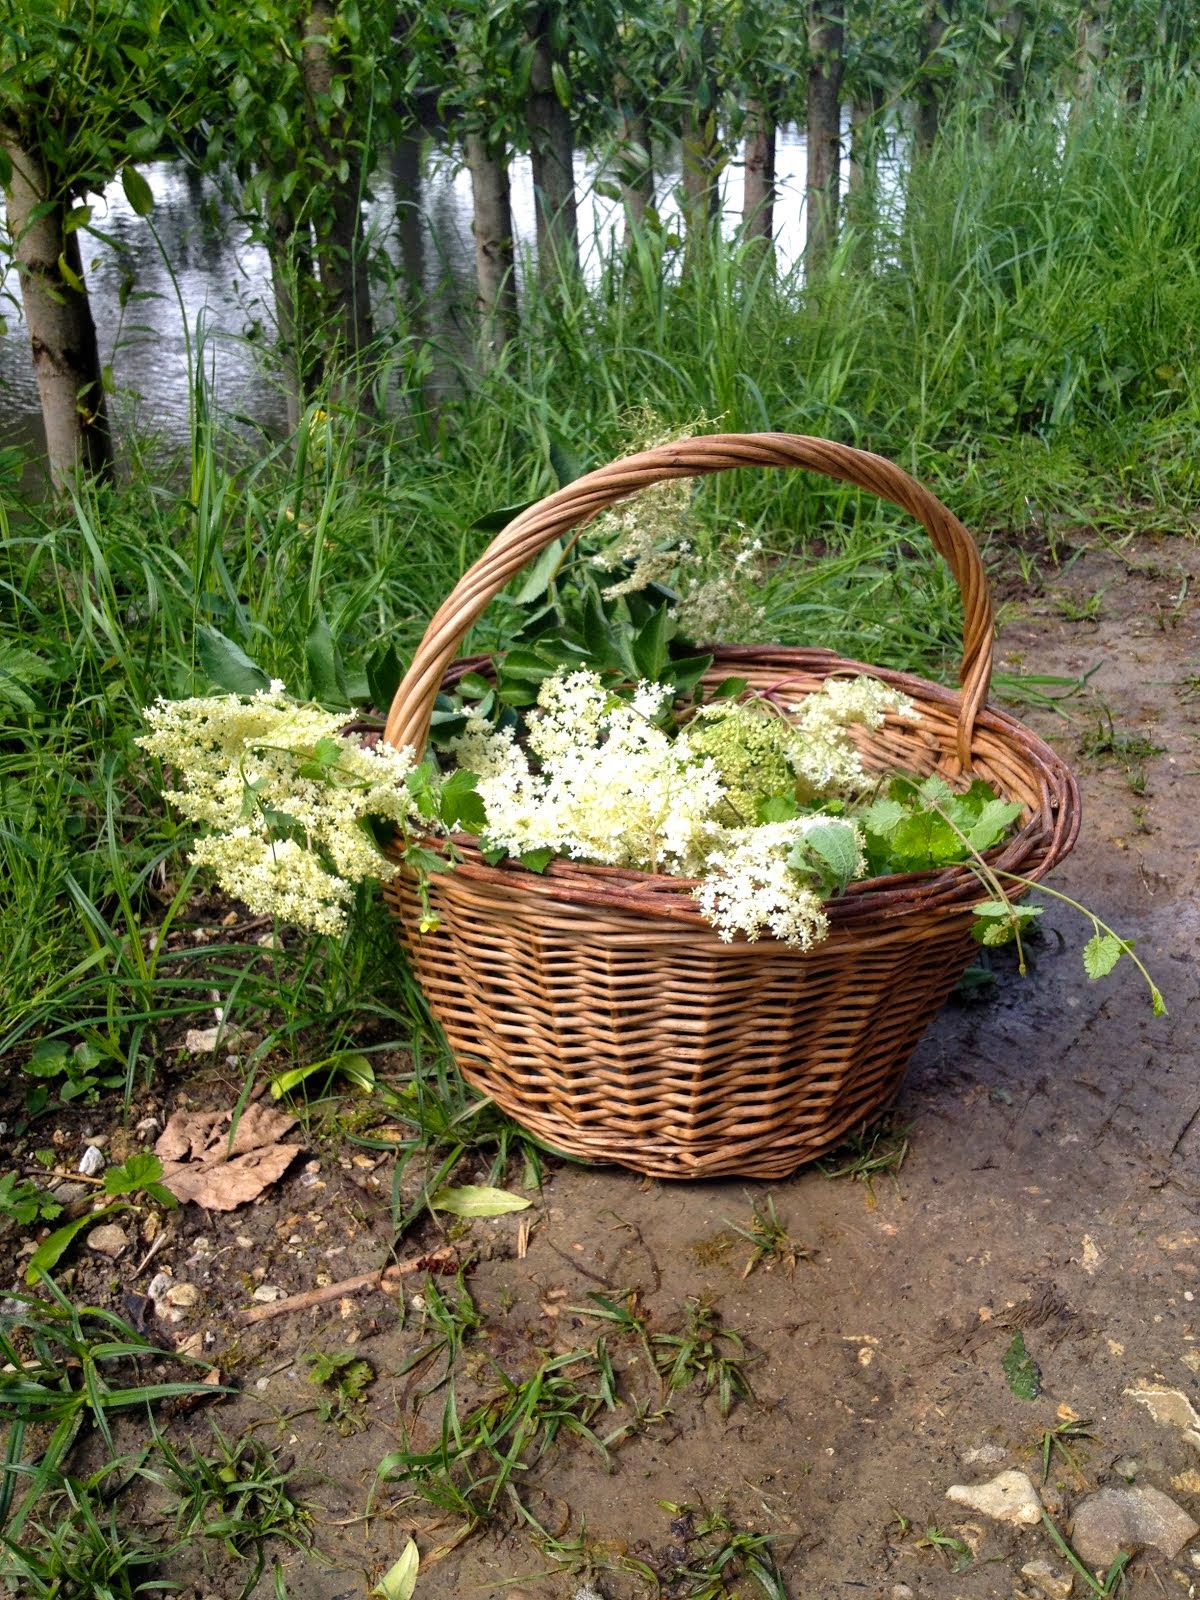 Our Basket of Bounty